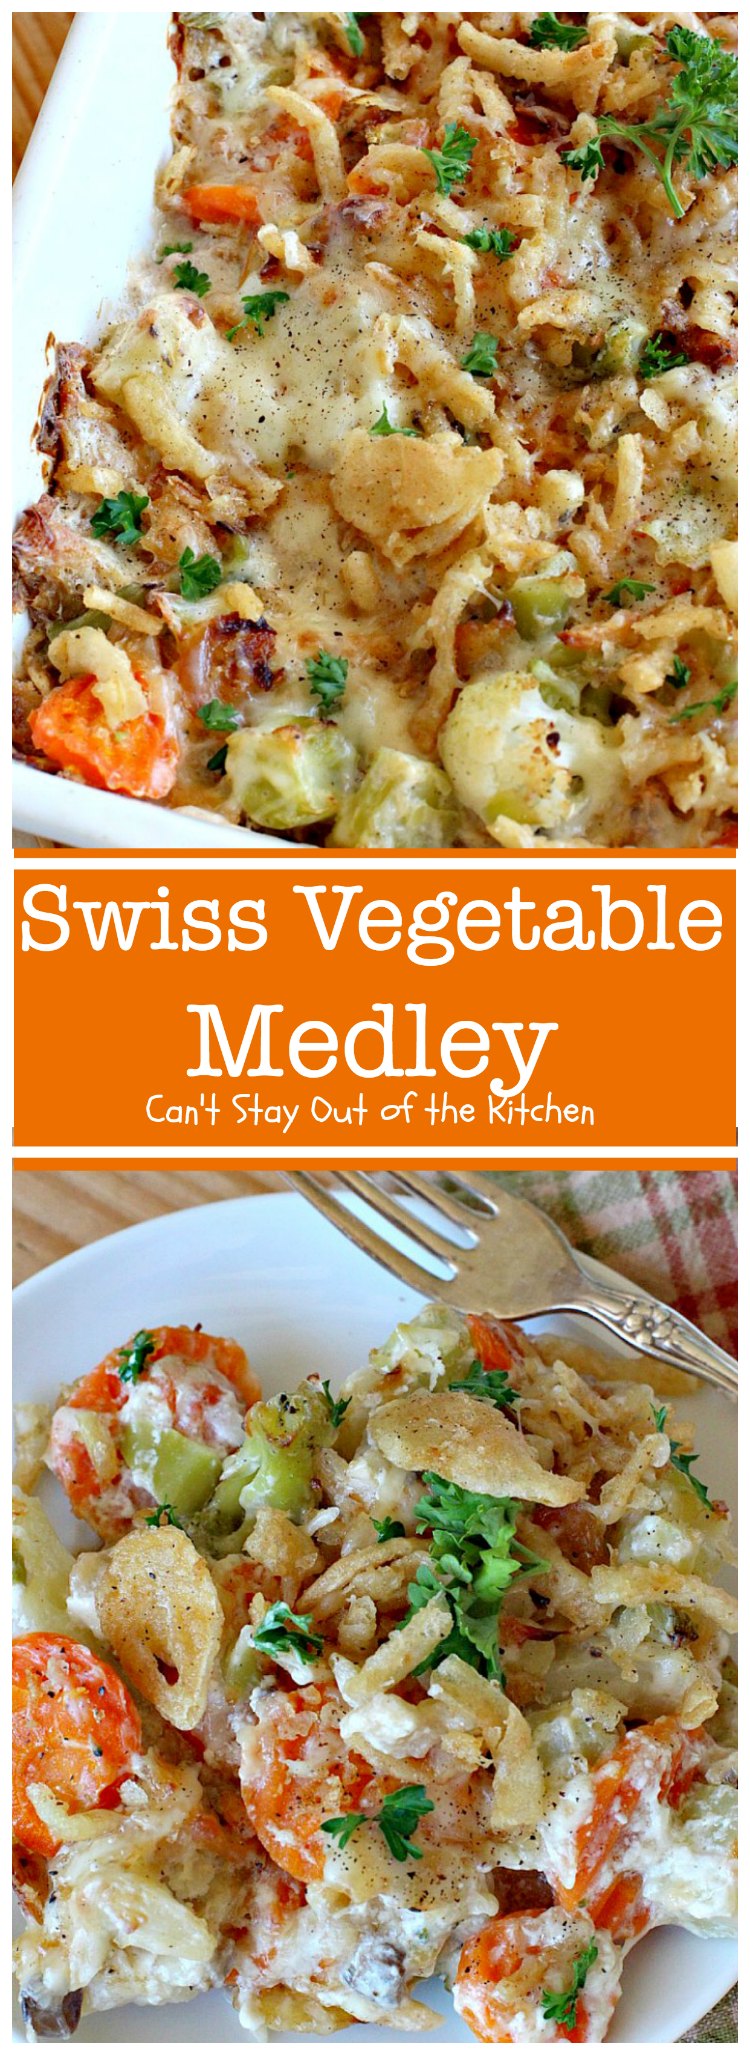 Swiss Vegetable Medley | Can't Stay Out of the Kitchen